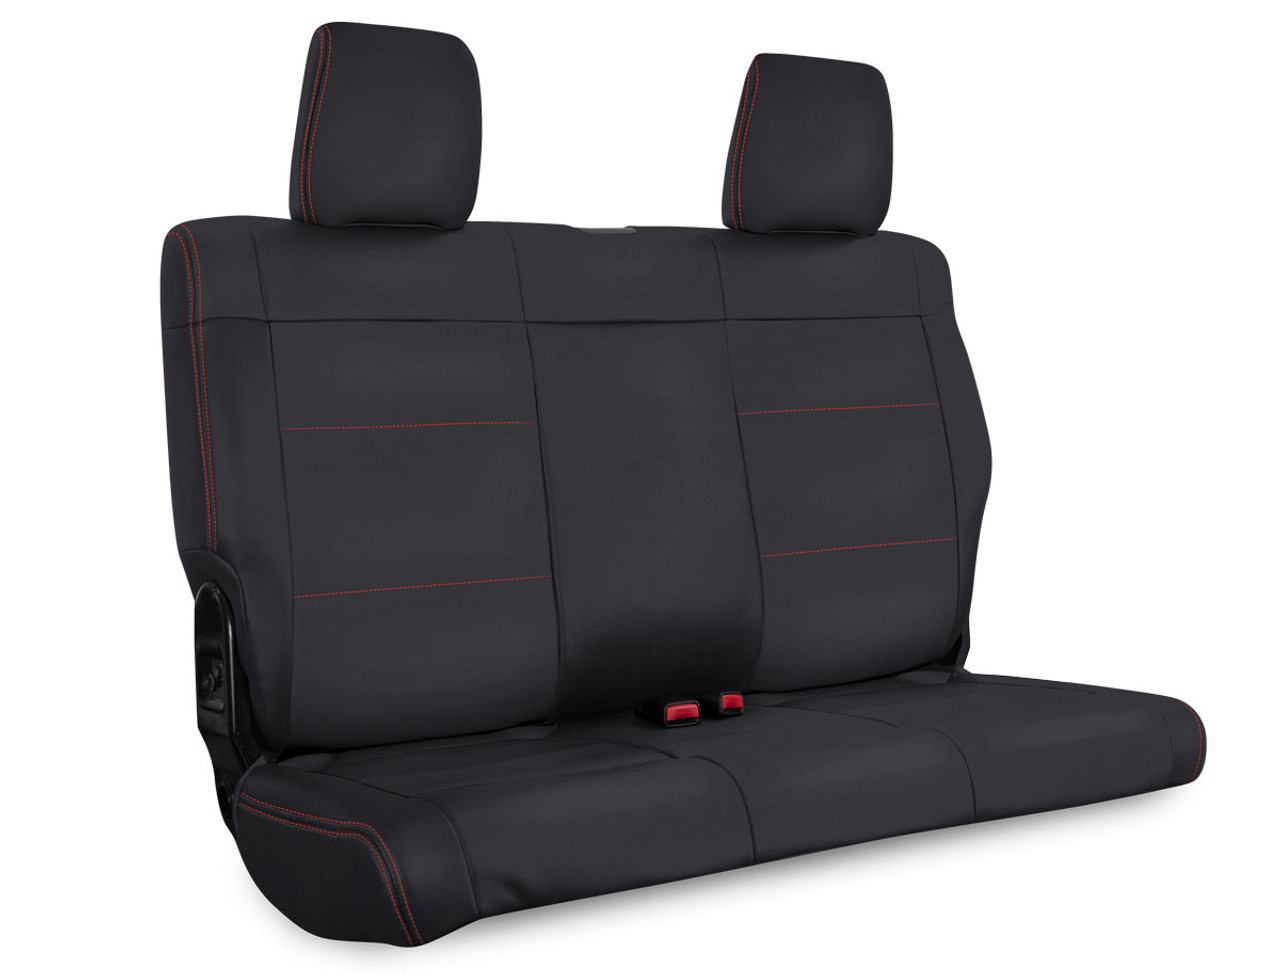 Rear Seat Cover for '11'12 Jeep Wrangler JK, 2 door - Black with Red Stitching